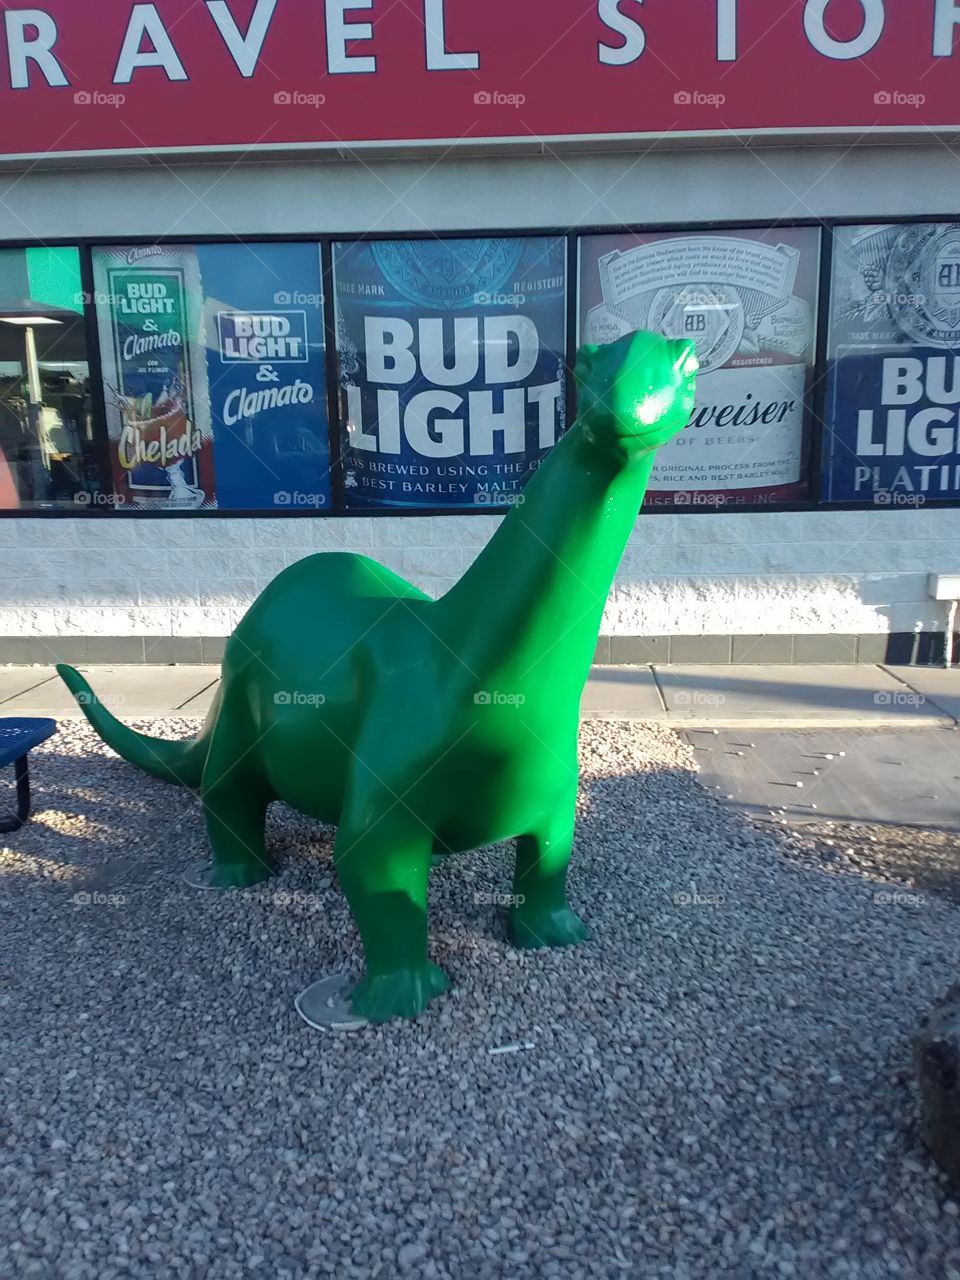 going to Arizona to see my in-laws.so we drop by a gas station and I saw this green dinosaur and I thought the shape and color was very cool. so I had to take a picture of it